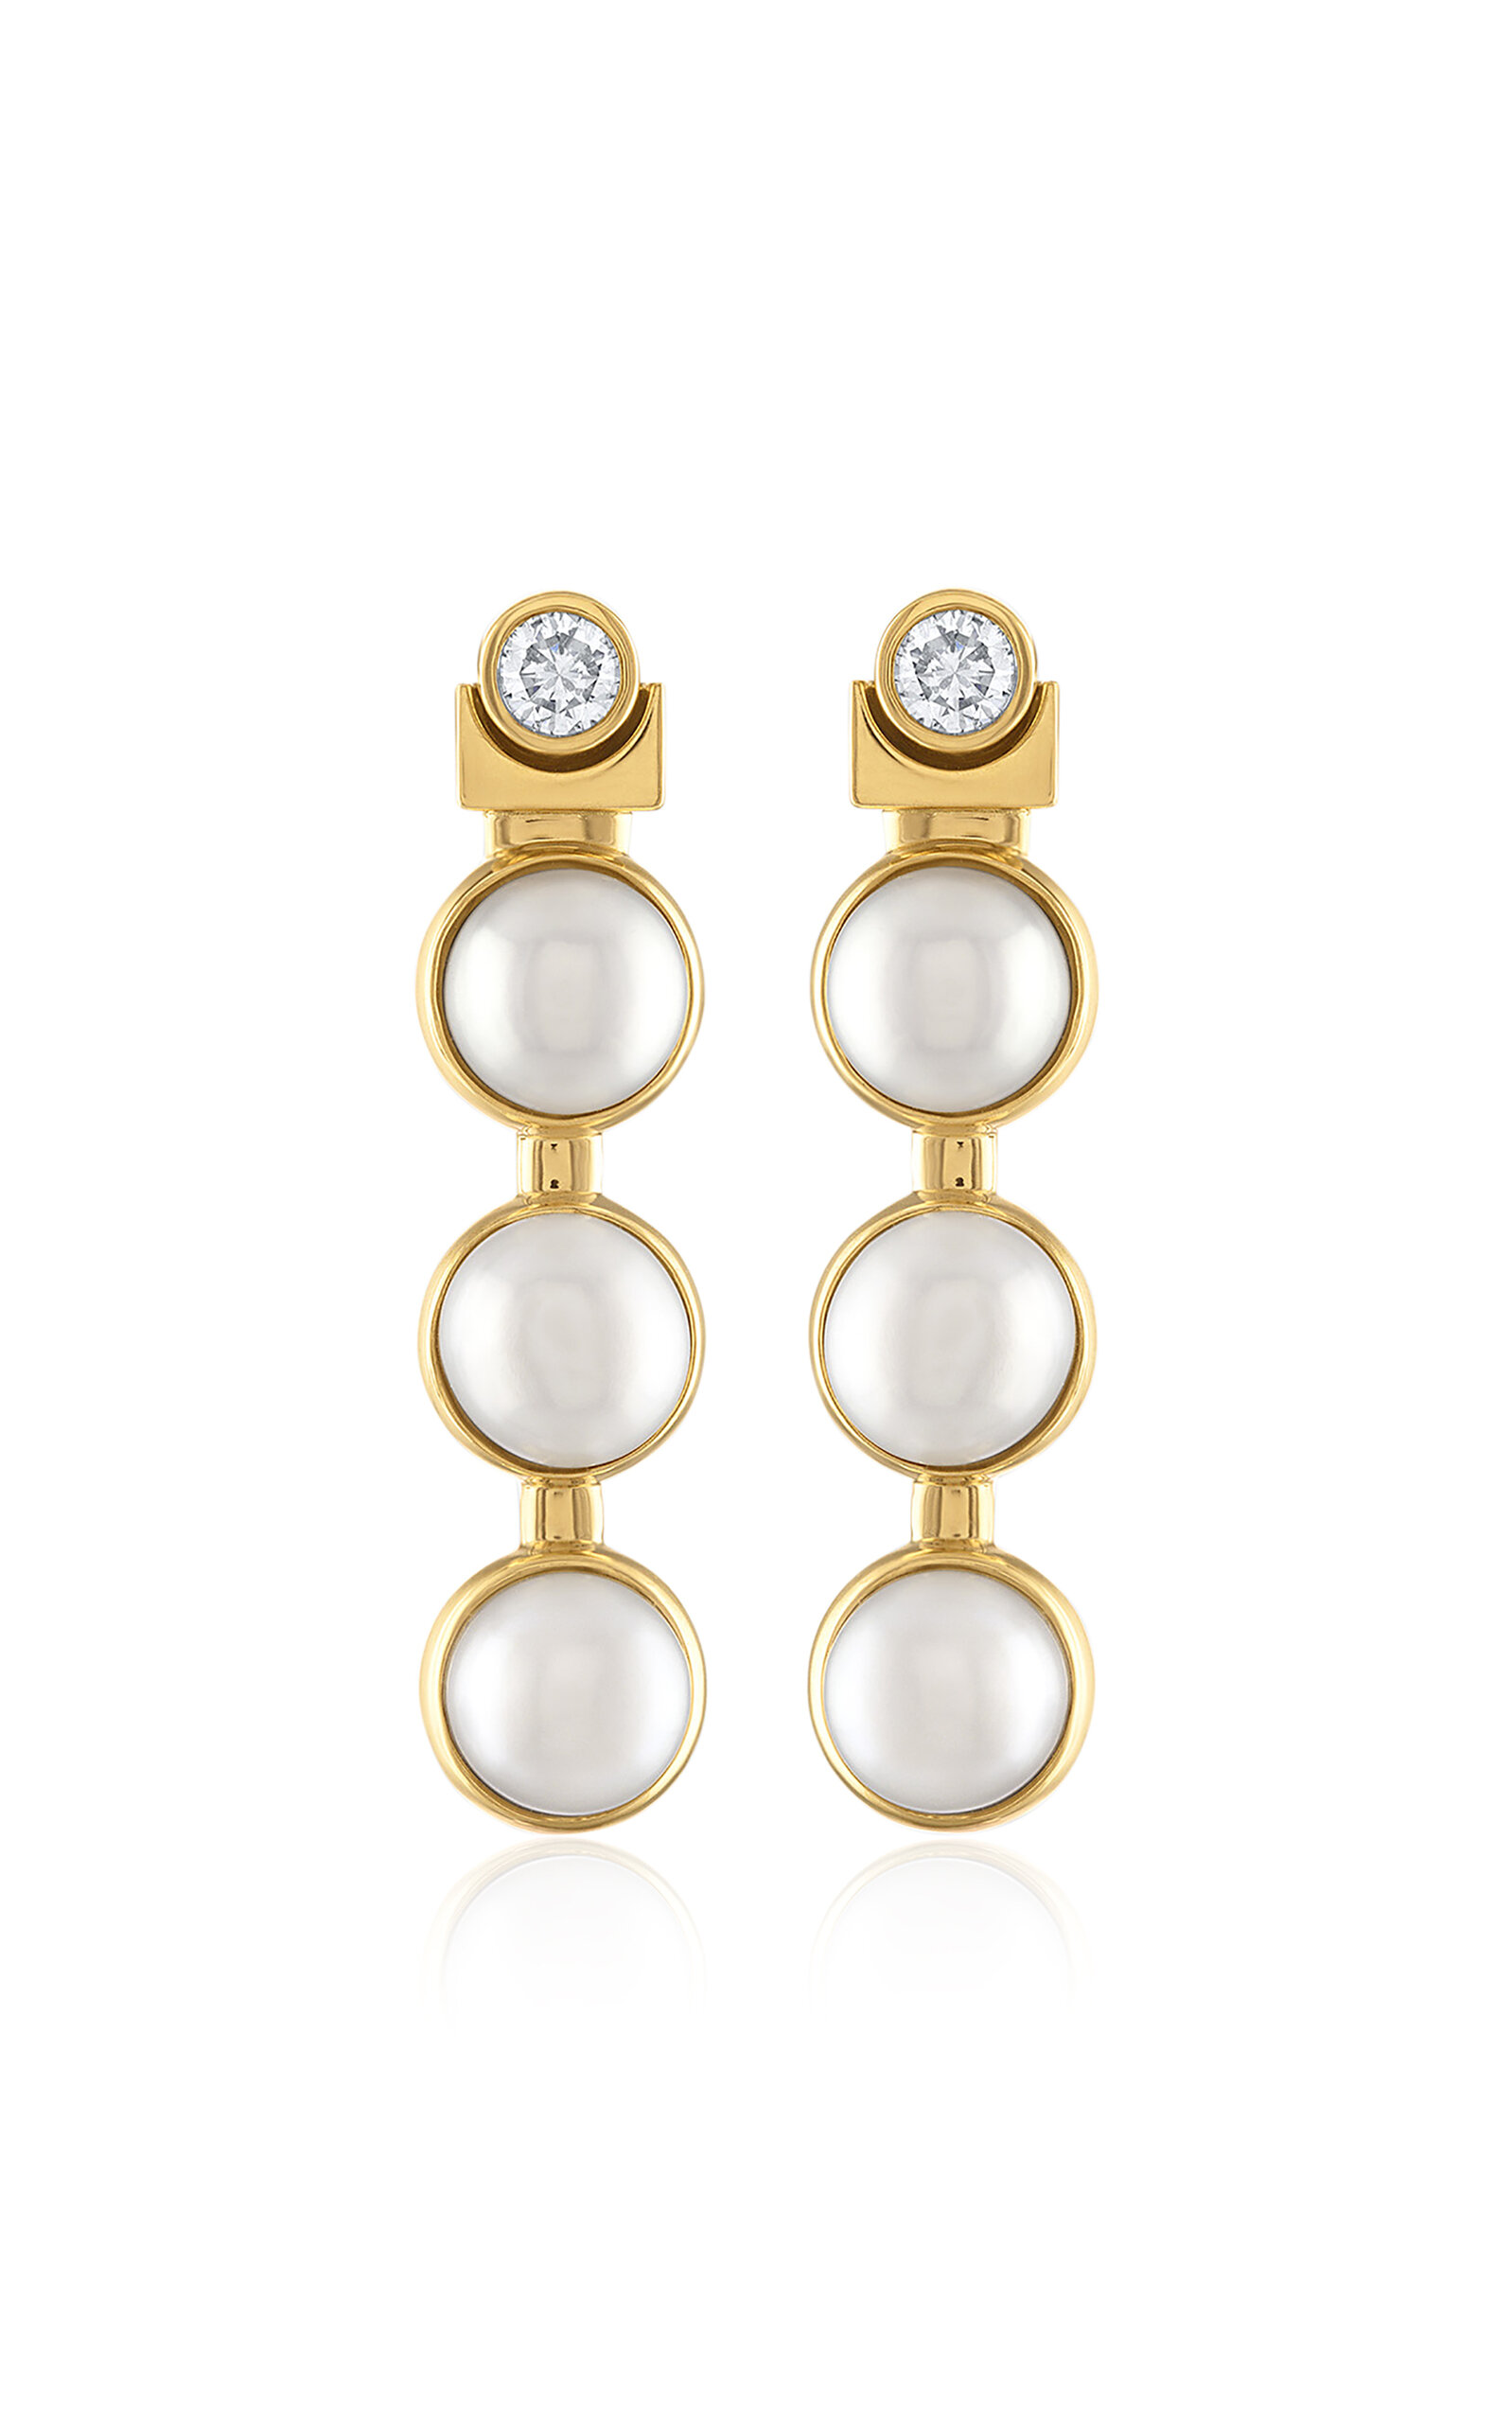 18k Yellow Gold Harbour Earrings with Pearl and Diamond